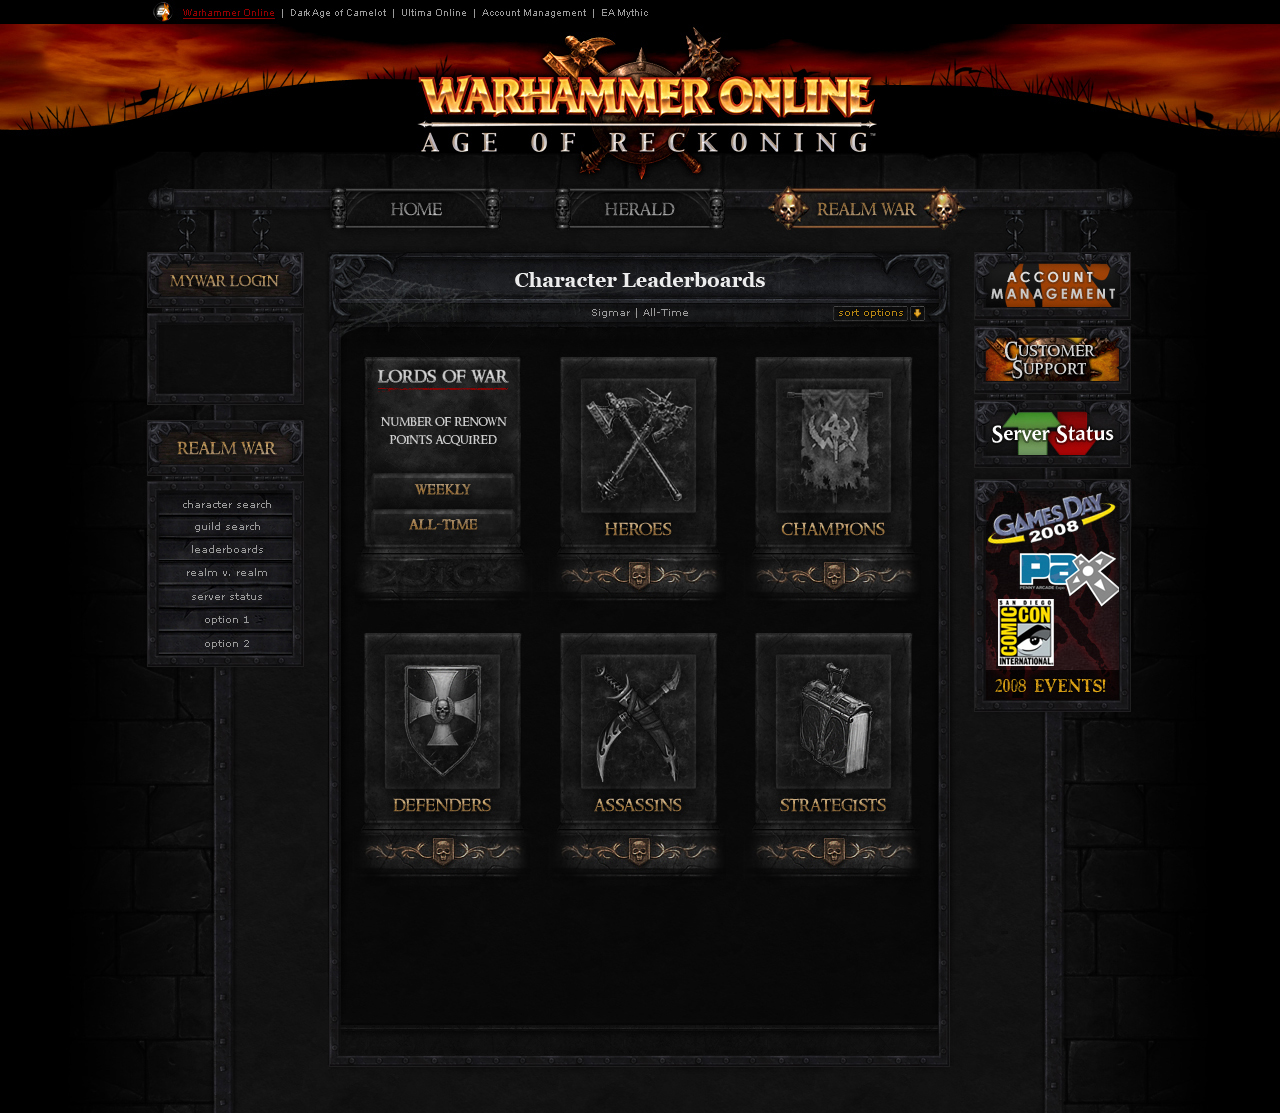 Warhammer Online - Launch Site - Realm War Selection